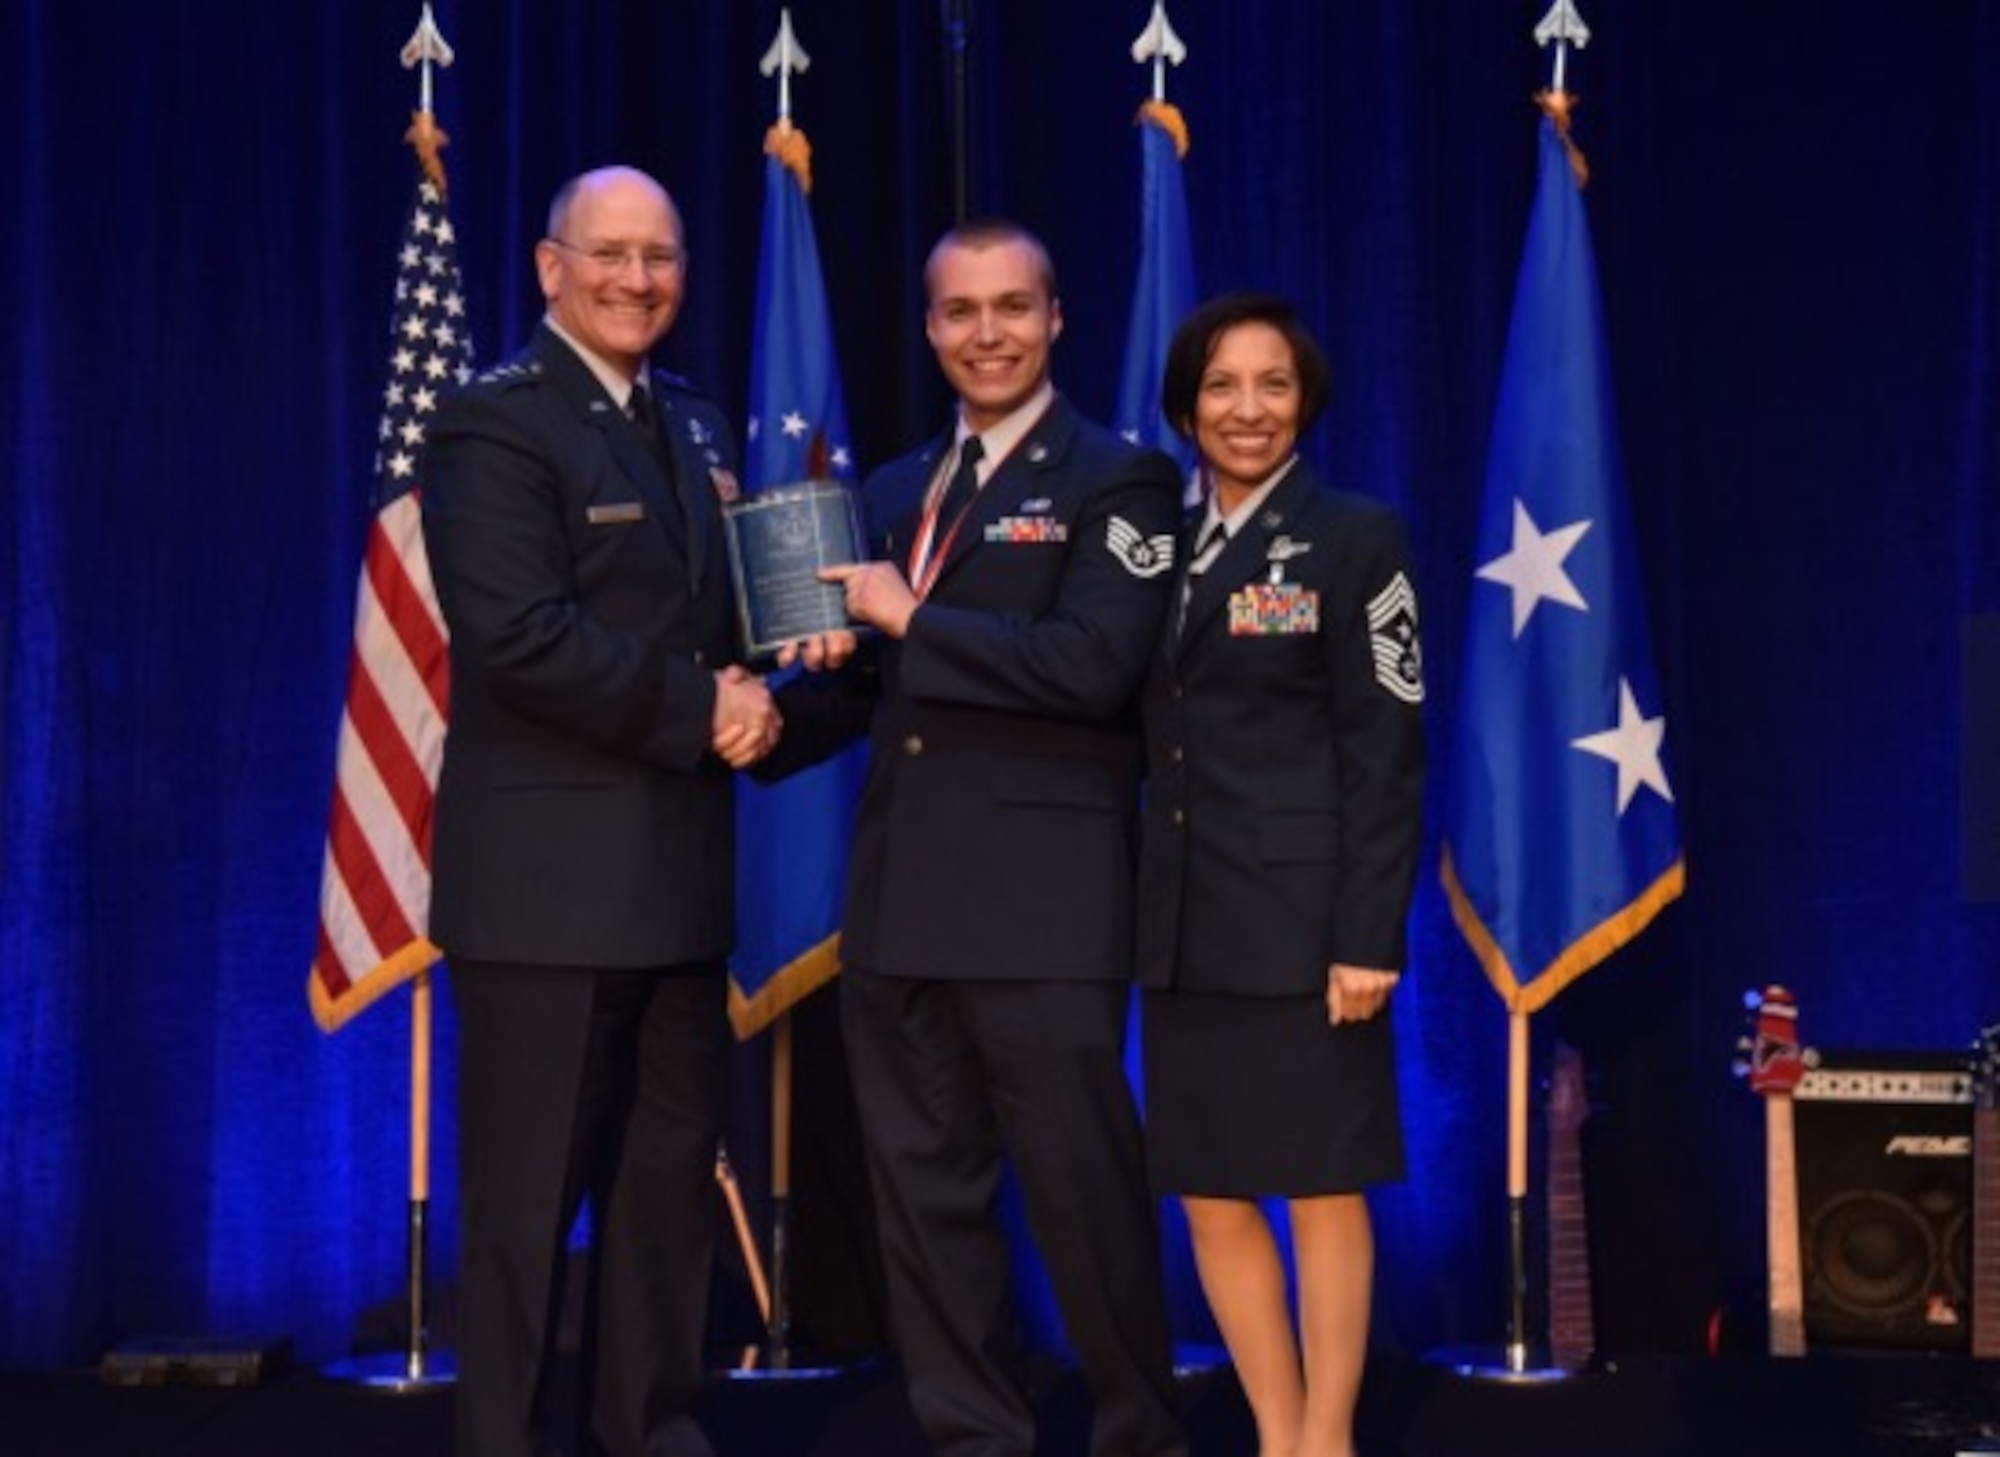 Staff Sgt. Mitchell Ciccarelli, Air Reserve Personnel Center casualty service technician, is presented the 2015 Headquarters Air Force Reserve Command Airman of the Year award by Lt. Gen. James F. Jackson, chief of the Air Force Reserve and commander of AFRC, as Chief Master Sgt. Ericka Kelley, AFRC command chief master sergeant, stands by April 16, 2016, at the AFRC Outstanding Airmen of the Year Banquet held in Jacksonville, Fla. (Air Force courtesy photo)